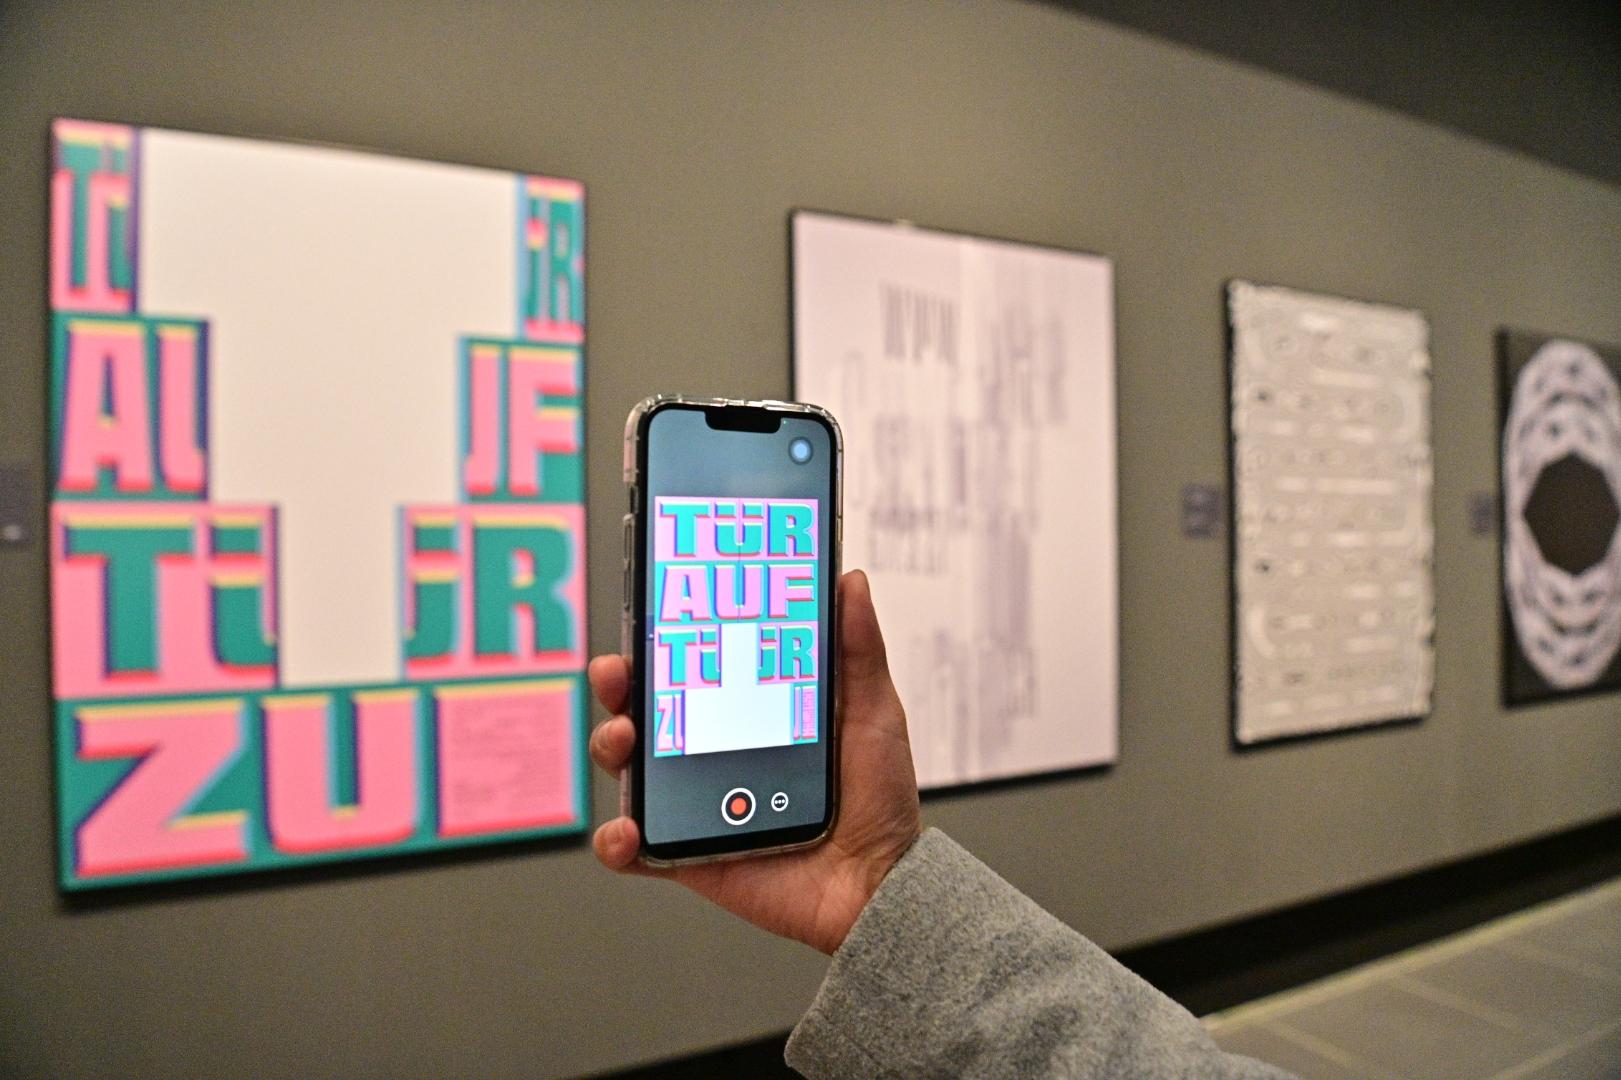 The opening ceremony for the "Still & Motion - Hong Kong International Poster Triennial 2021" exhibition was held today (December 13) at the Hong Kong Heritage Museum. Photo shows a visitor using the augmented reality (AR) mobile app to view the impact of poster animations through a smartphone.